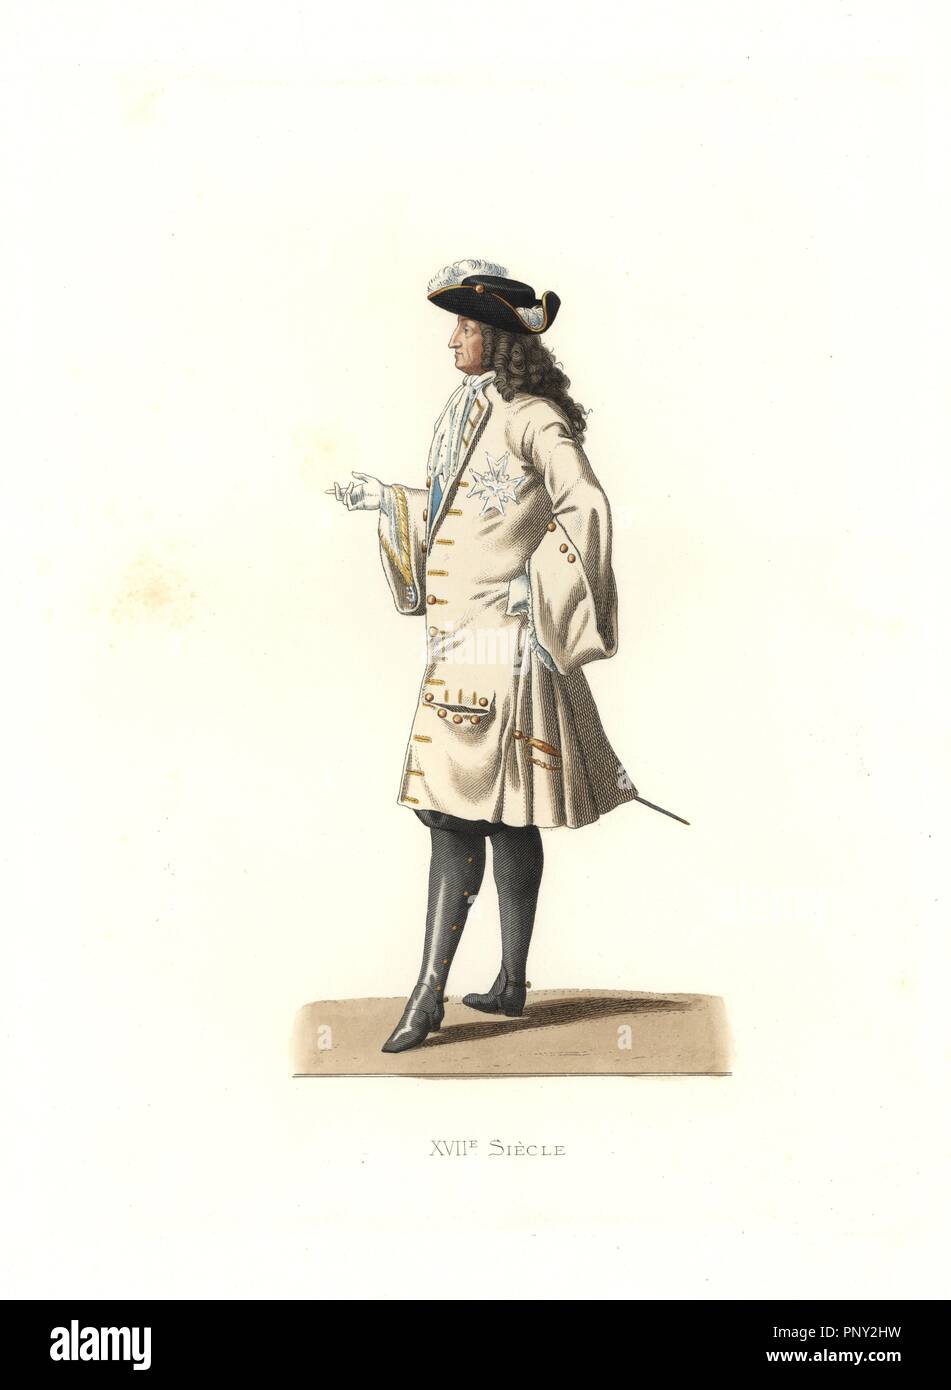 King Louis XIV of France, 1701. Handcolored illustration by E. Lechevallier-Chevignard, lithographed by A. Didier, L. Flameng, F. Laguillermie, from Georges Duplessis's 'Costumes historiques des XVIe, XVIIe et XVIIIe siecles' (Historical costumes of the 16th, 17th and 18th centuries), Paris 1867. The book was a continuation of the series on the costumes of the 12th to 15th centuries published by Camille Bonnard and Paul Mercuri from 1830. Georges Duplessis (1834-1899) was curator of the Prints department at the Bibliotheque nationale. Edmond Lechevallier-Chevignard (1825-1902) was an artist, b Stock Photo